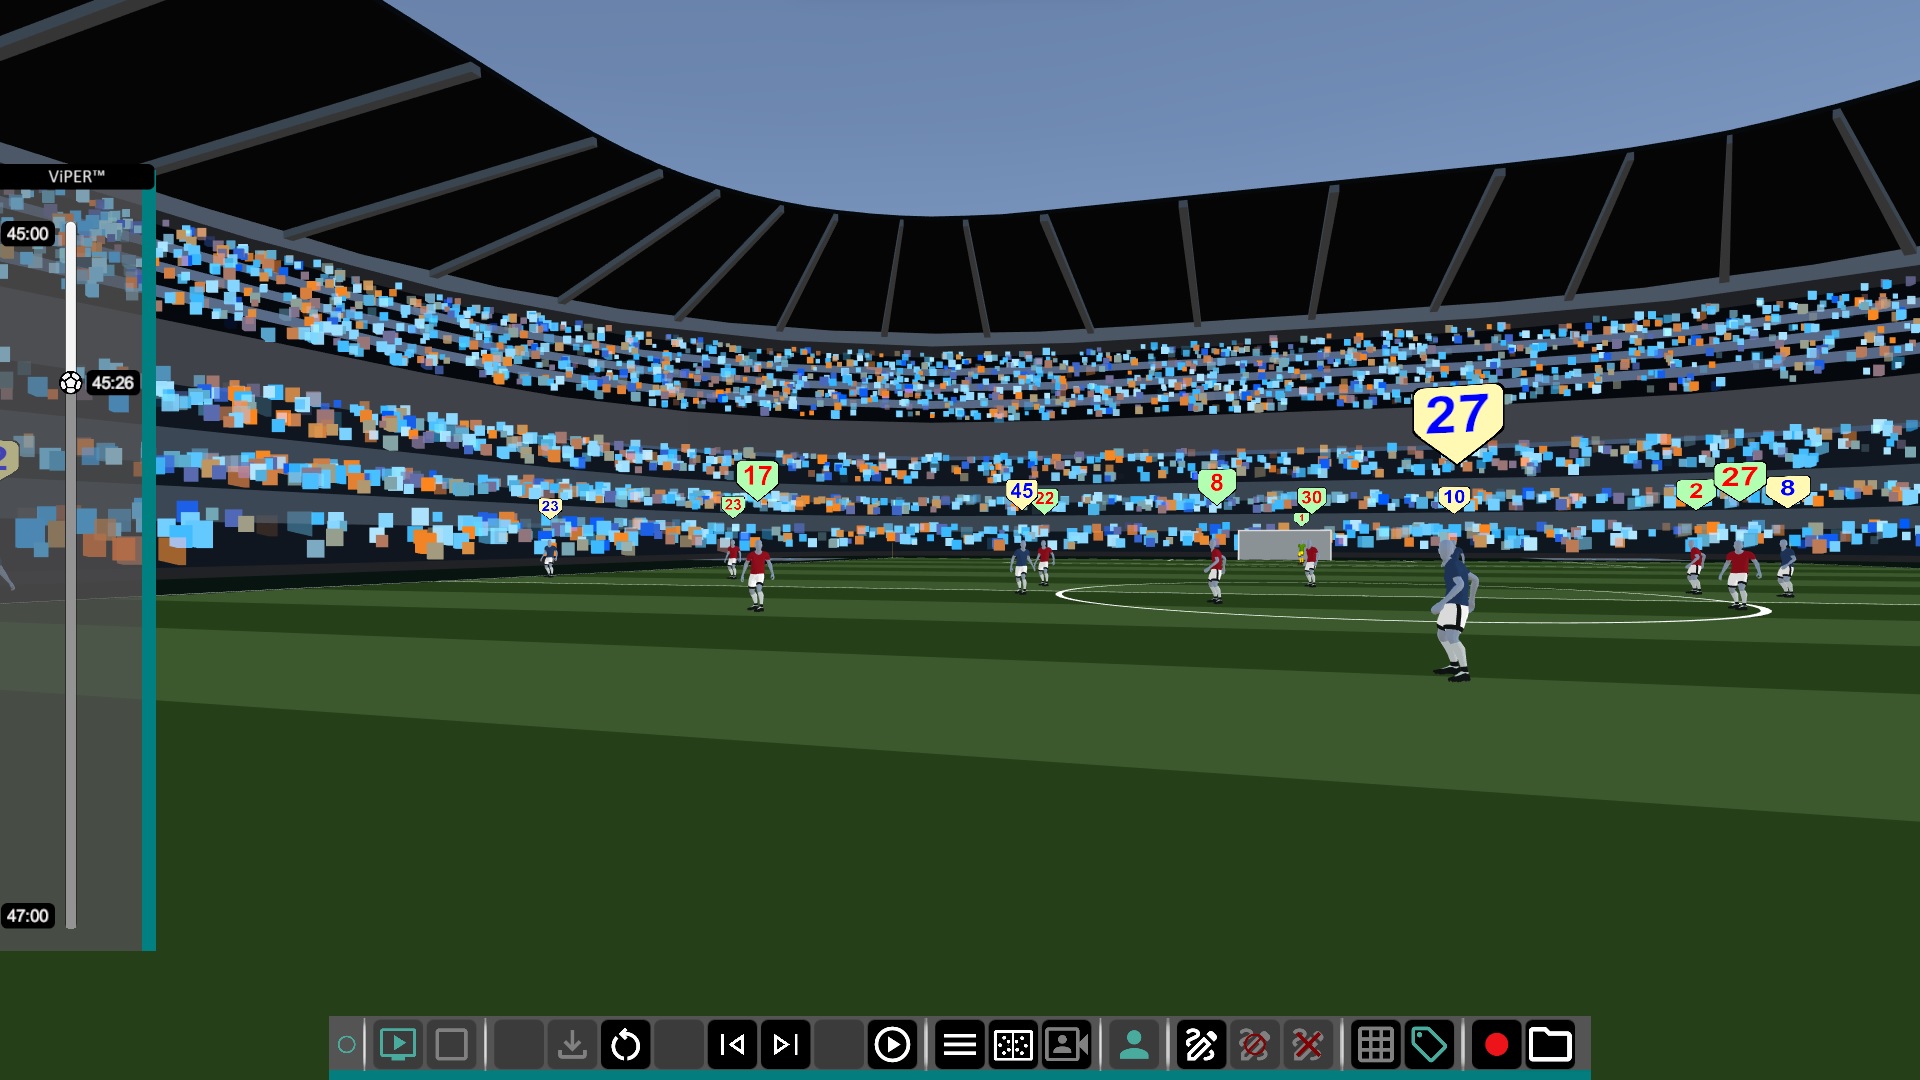 Player view on the soccer field